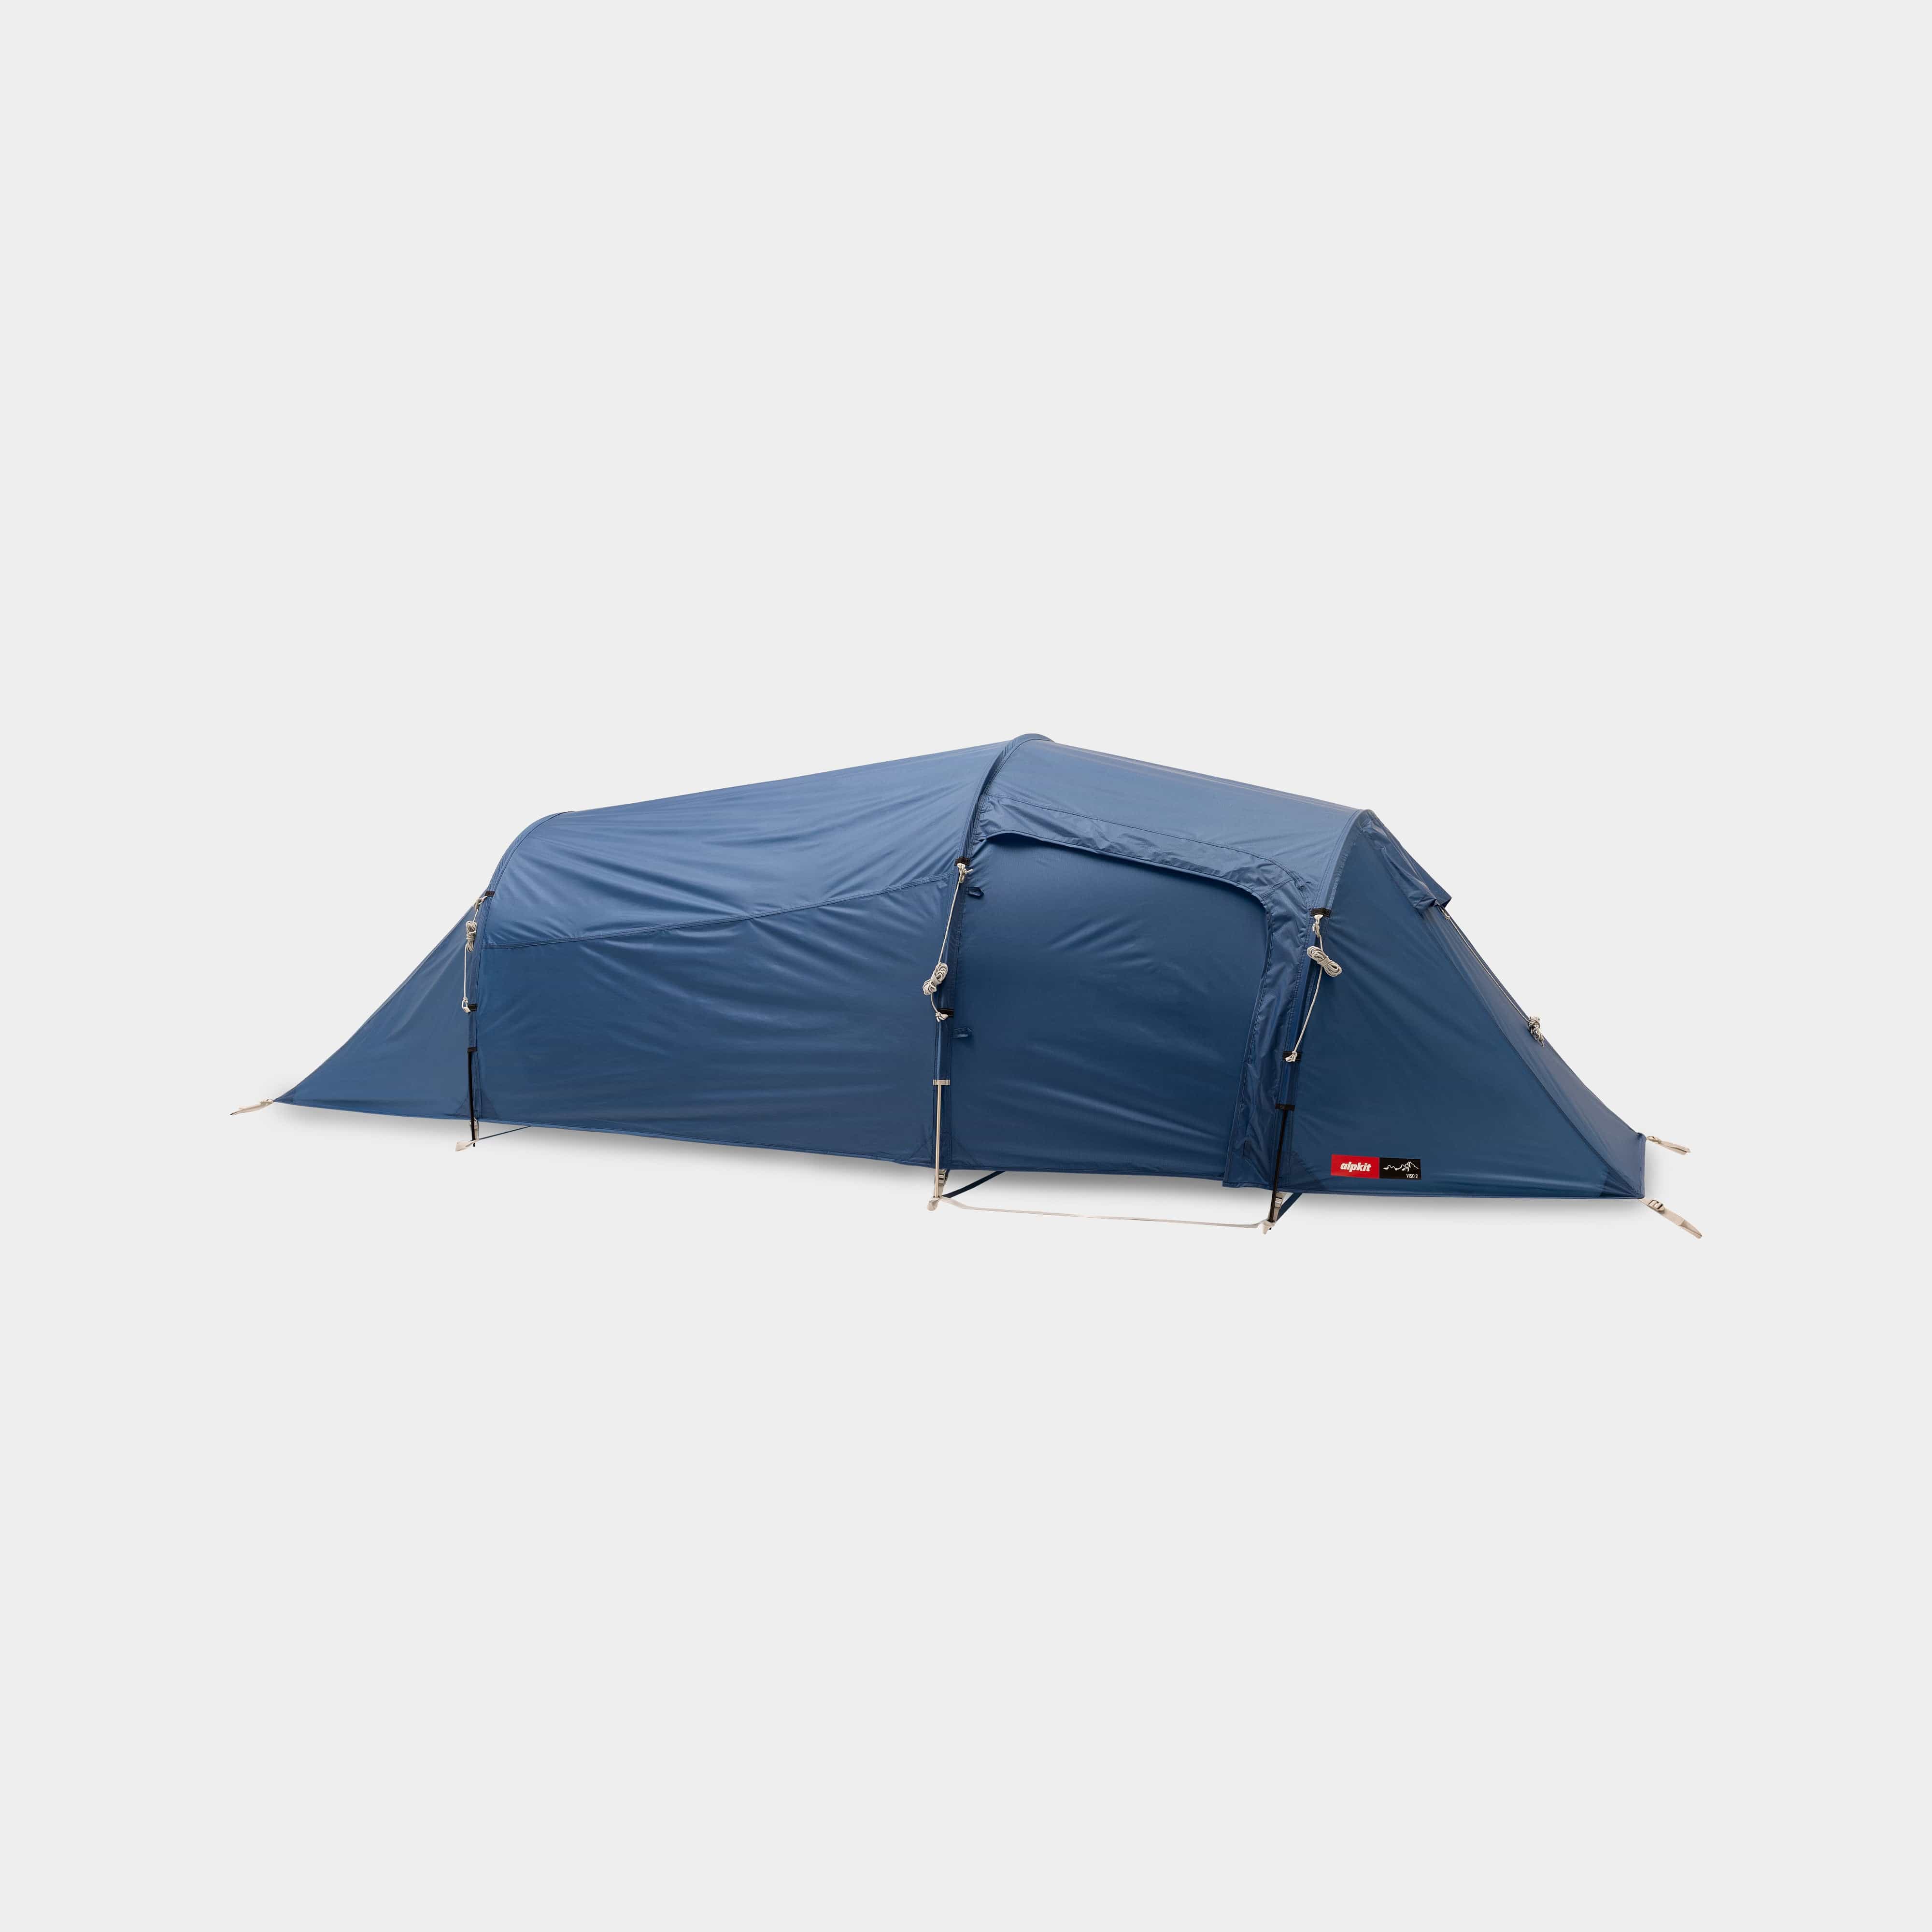 Viso 2 Spacious 2-Person Tunnel Tent